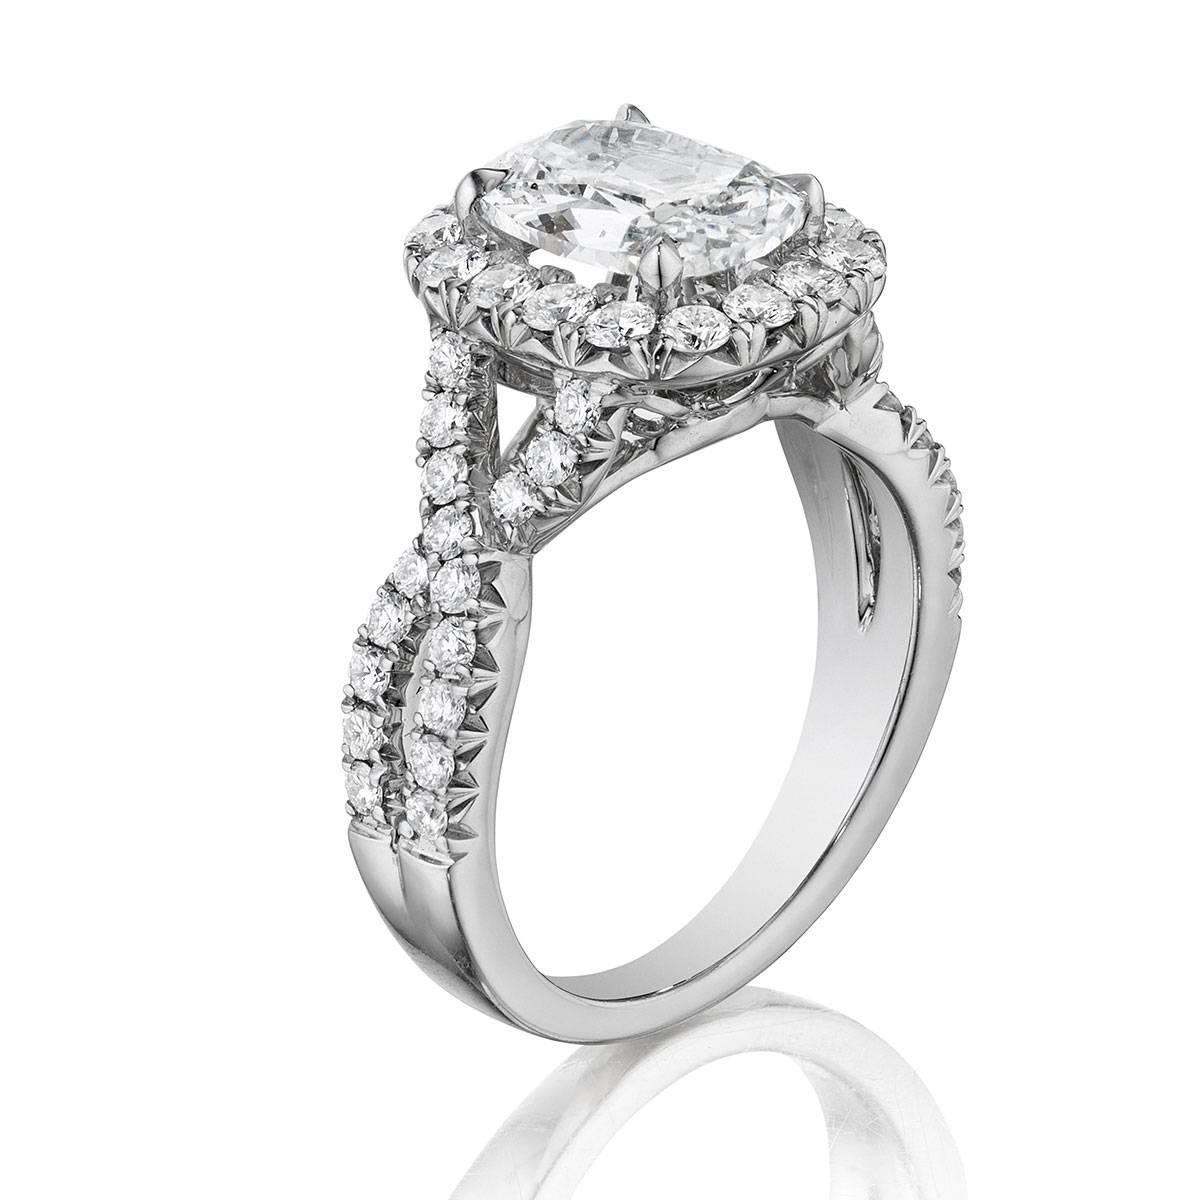 Material: 18k White Gold
Setting Style: Halo
Size: 6.5 (can be sized)
Center Diamond Details: 0.71ct cushion cut diamond. Center diamond is D in color and VVS2 in clarity. GIA Certified
Accent Diamond Details: 0.95ct round brilliant diamonds
SKU: